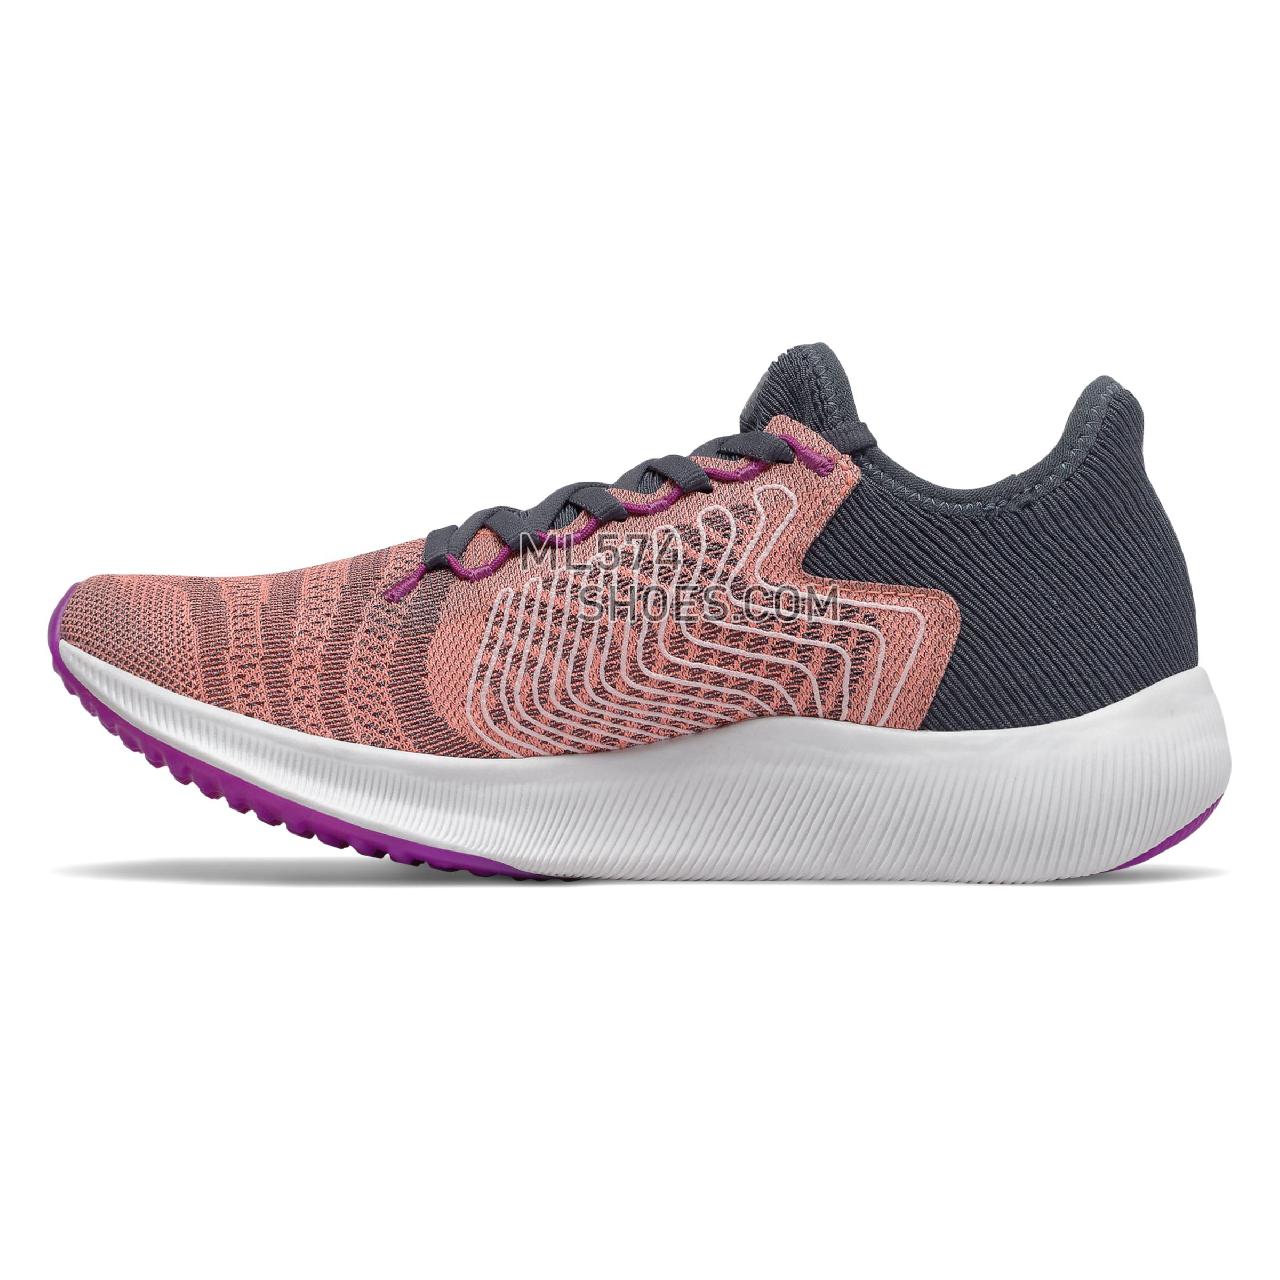 New Balance FuelCell Rebel - Women's Neutral Running - Ginger Pink with White and Black - WFCXPG